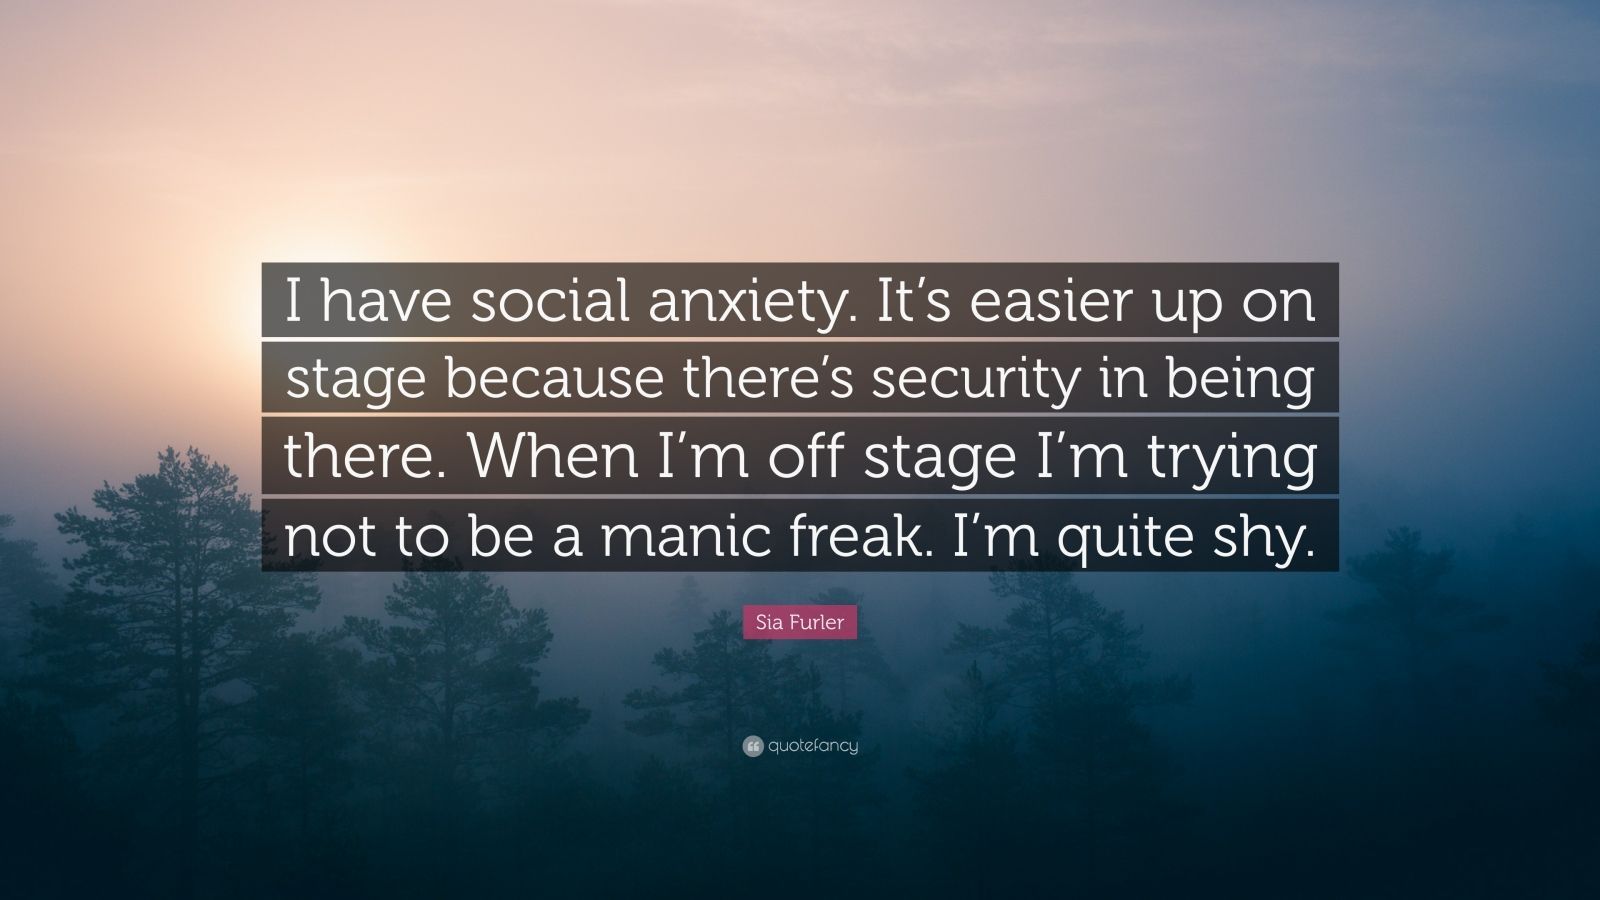 Sia Furler Quote: “I have social anxiety. It's easier up on stage because there's security in being there. When I'm off stage I'm trying no.”